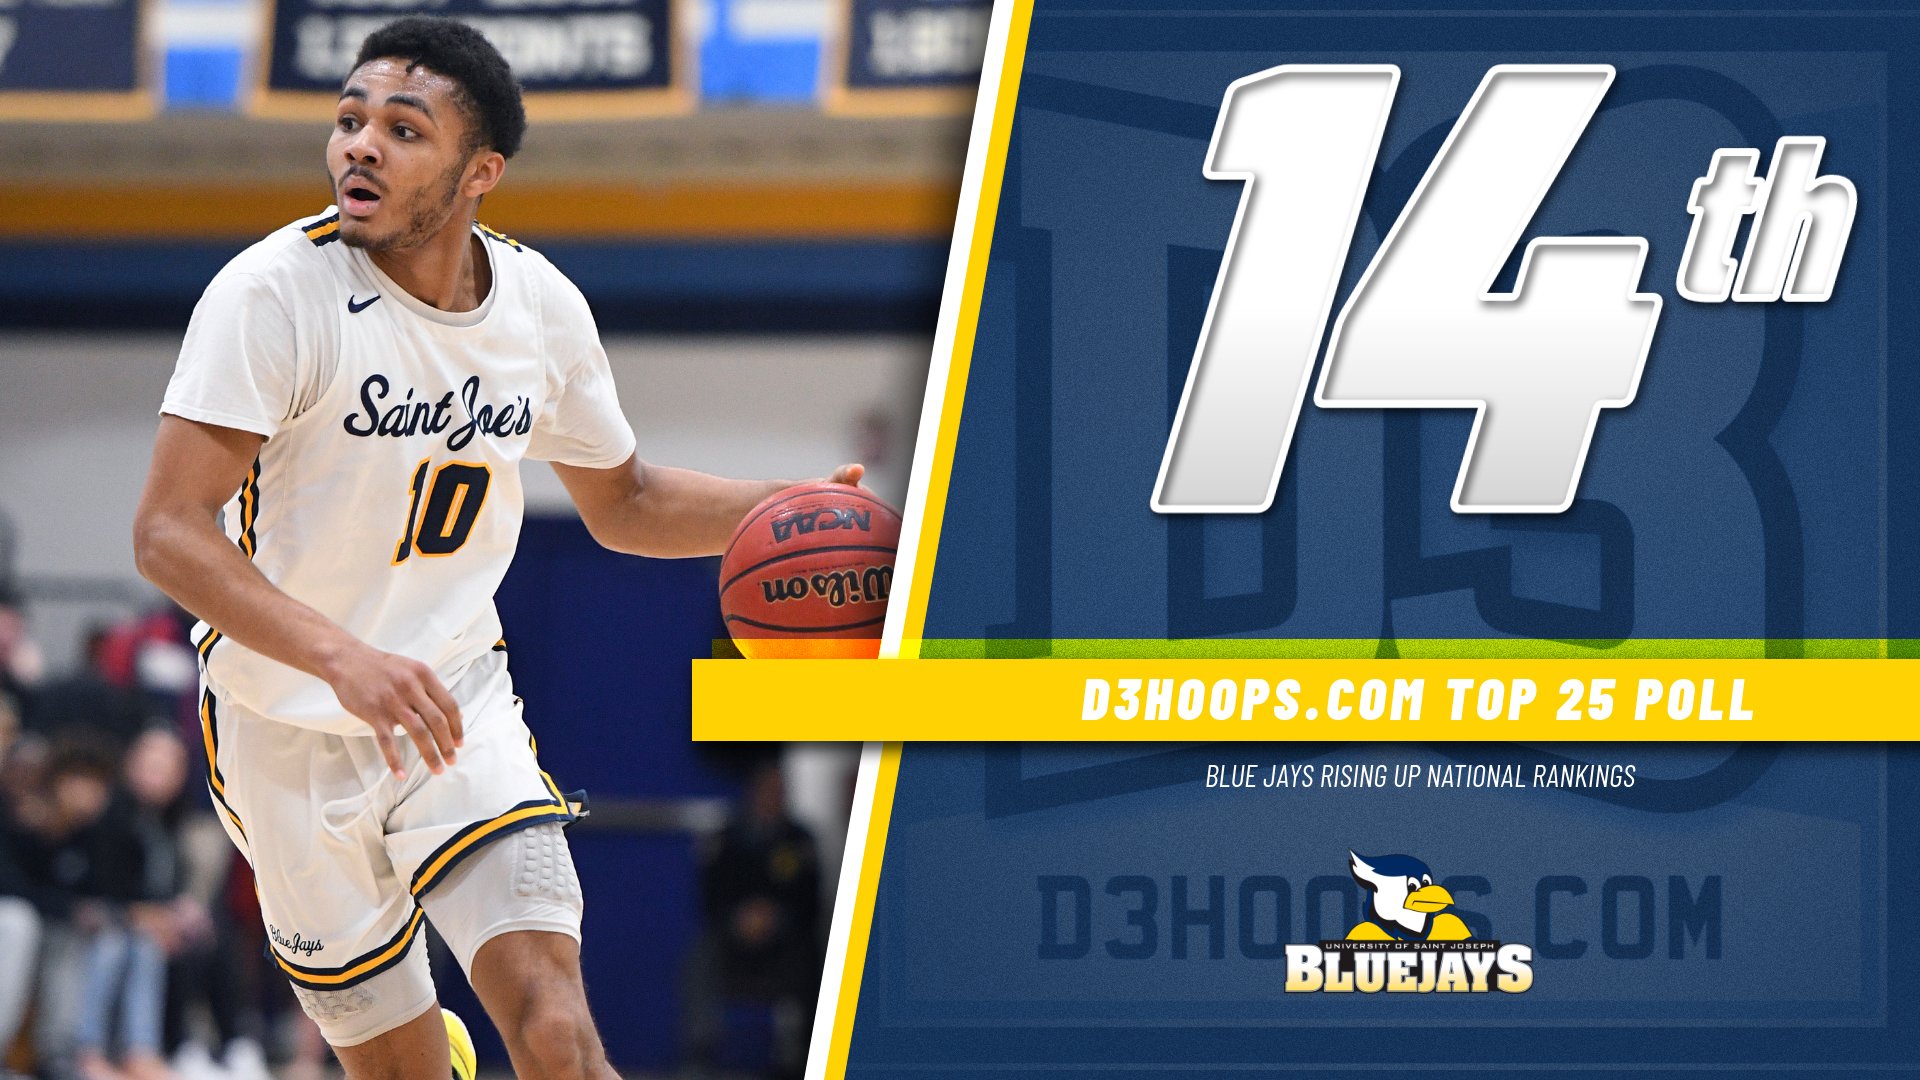 Men's Hoops 14th In National Ranks Ahead of NCAA Tourney